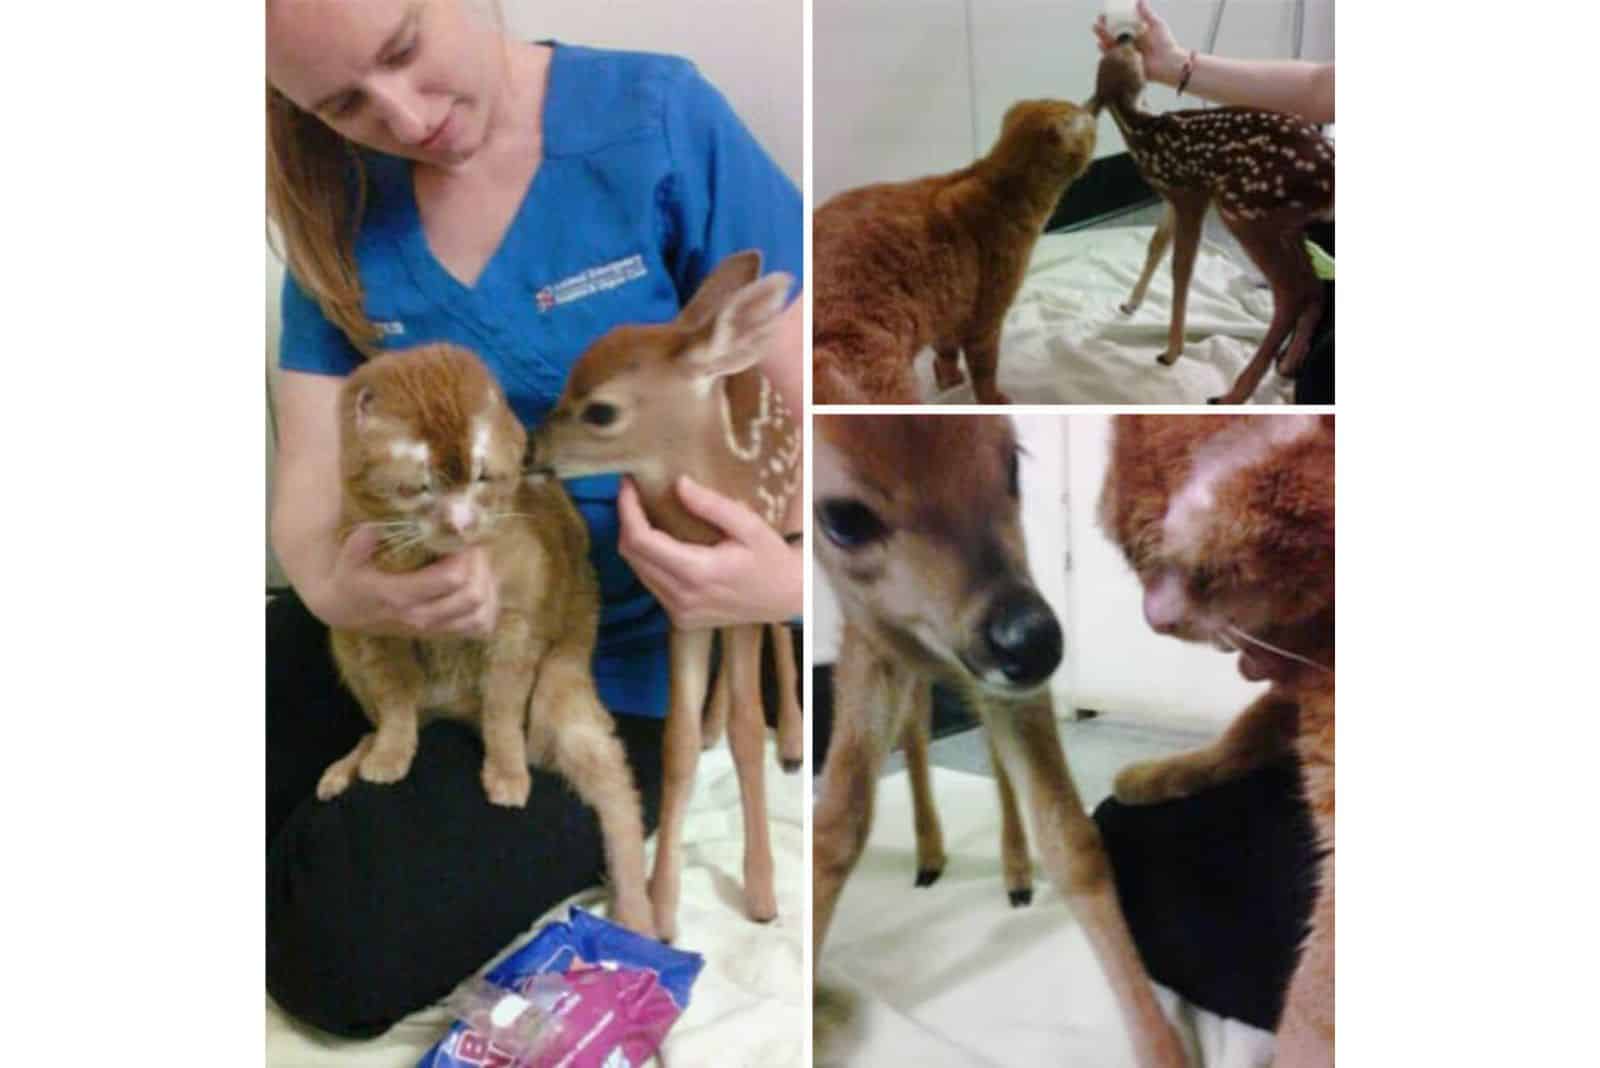 Russel helping other animals at the hospital